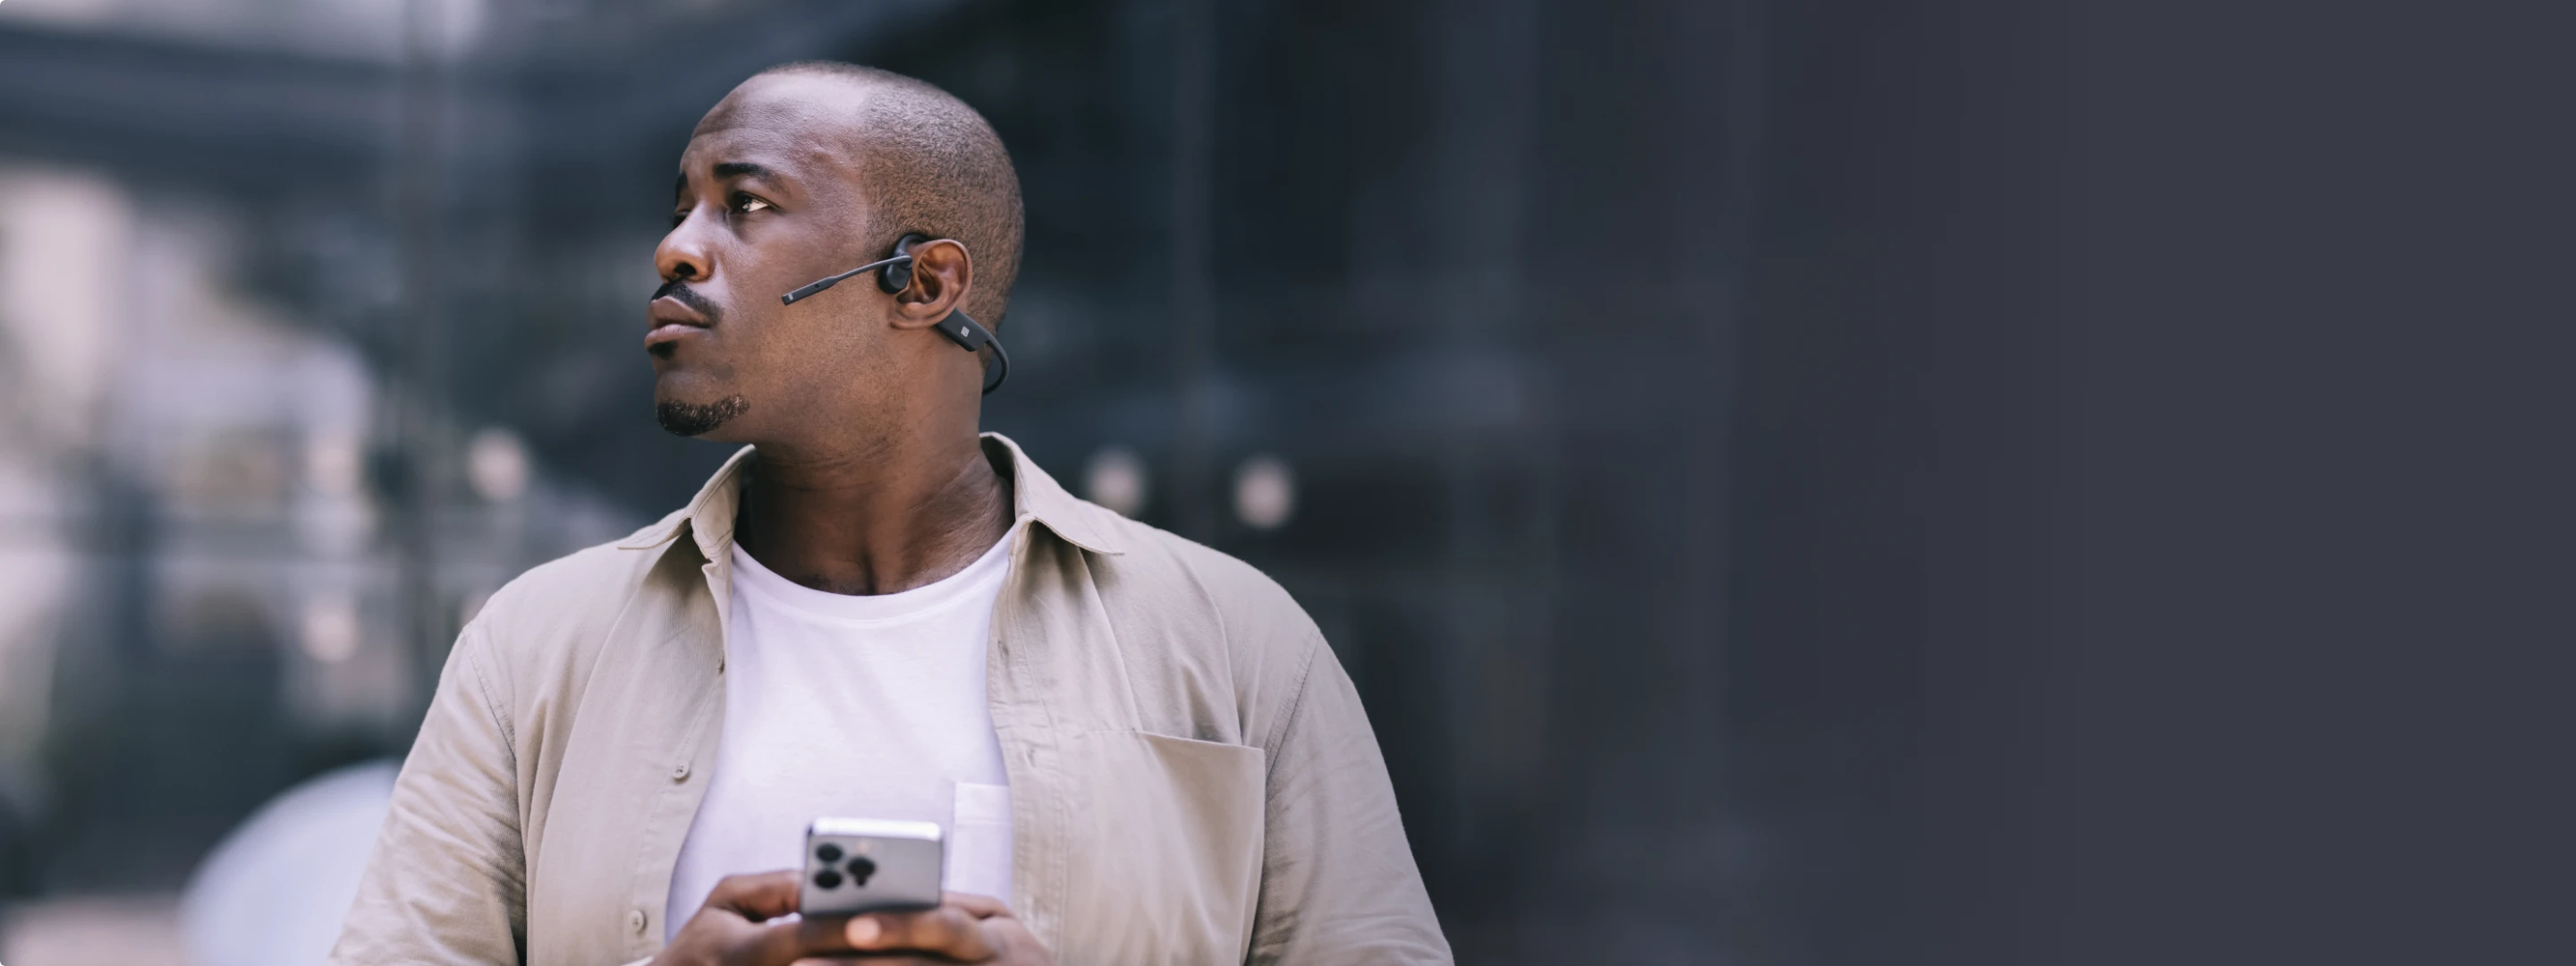 The open-ear design allows you to stay connected to your surrounding environment and pedestrians/vehicles on the road, providing security. At the same time, easily control your audio, communicate clearly, and stay connected to your work at all times.